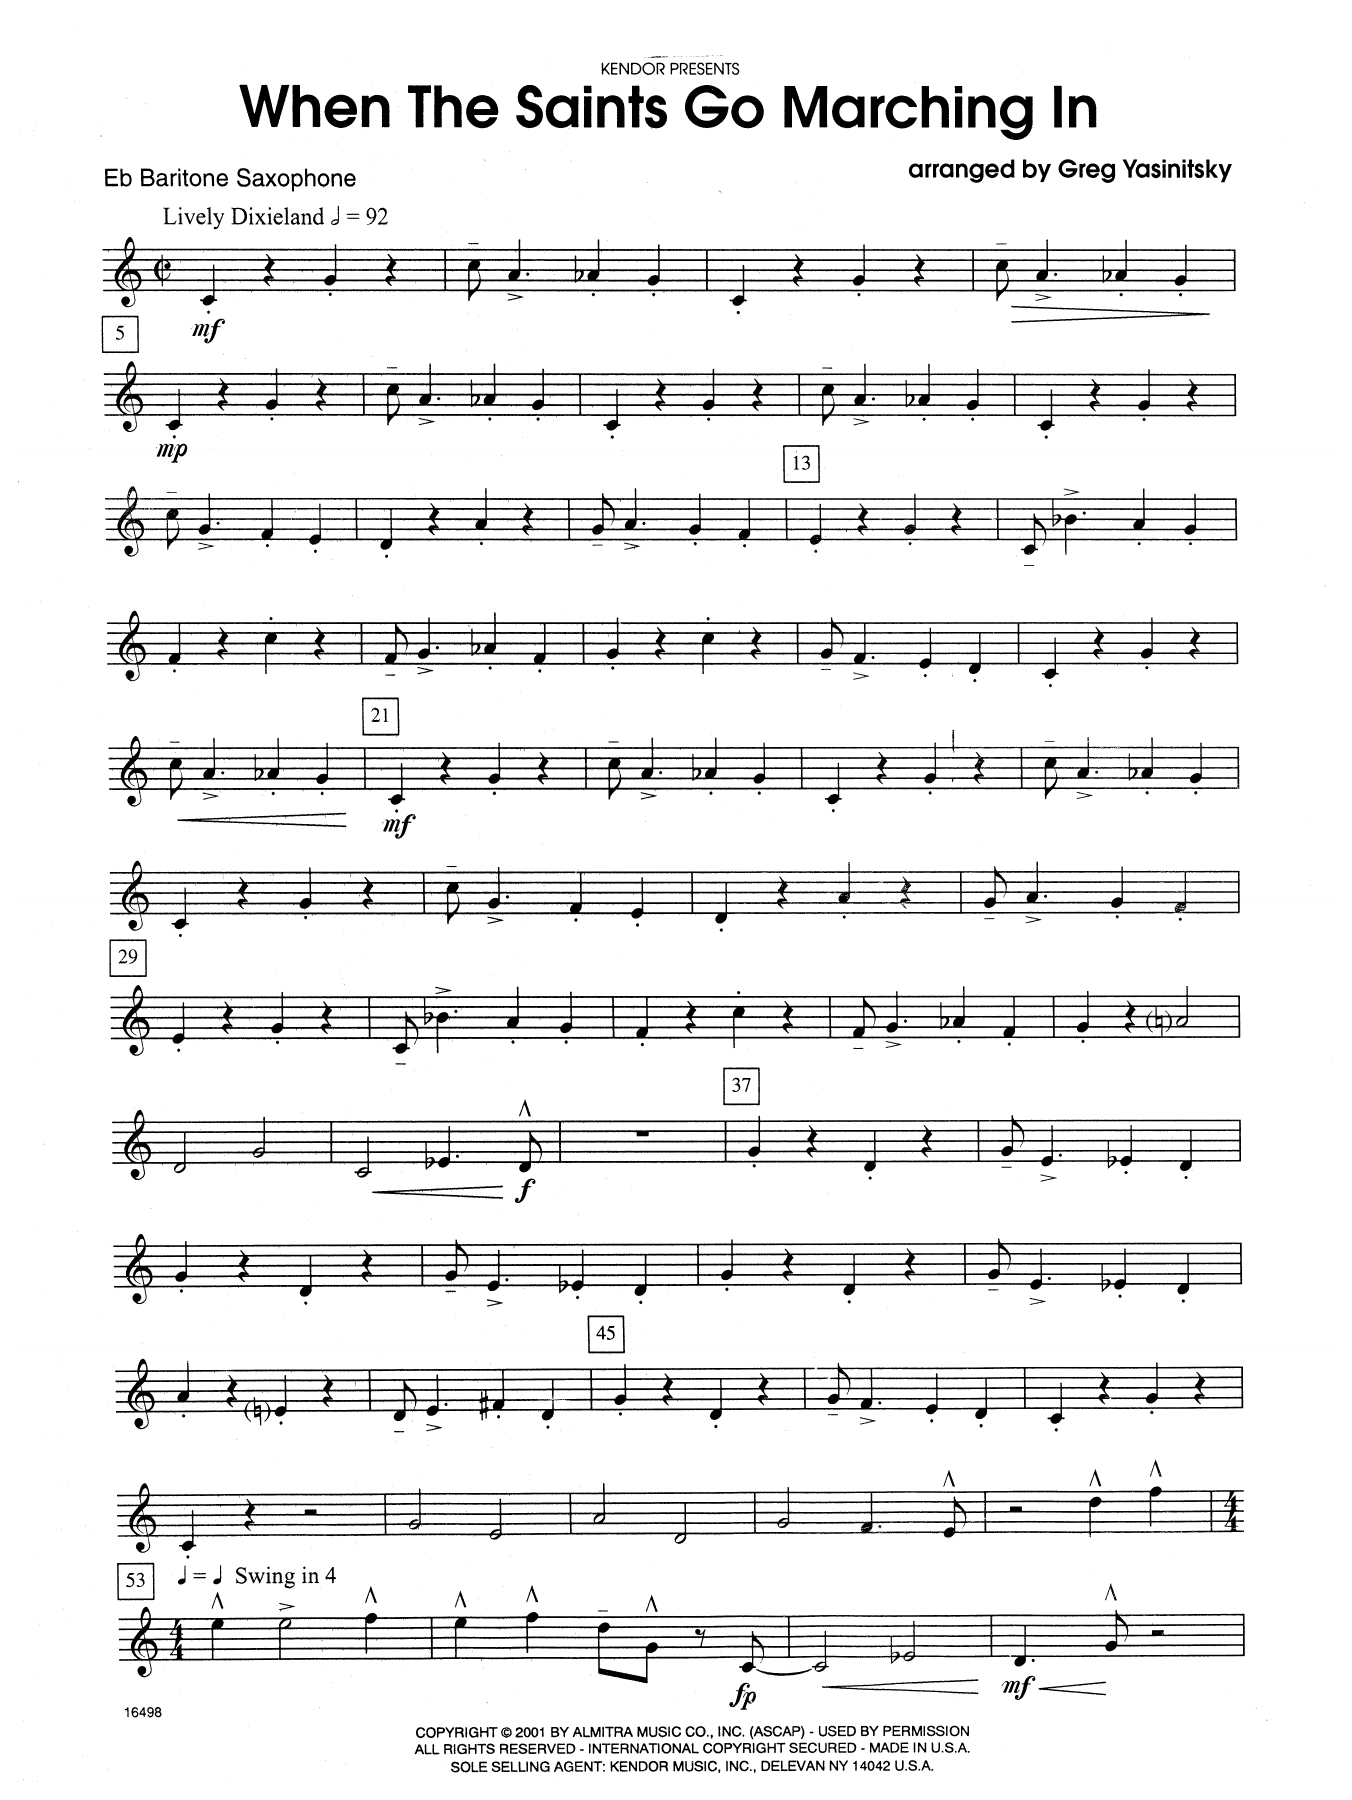 Gregory Yasinitsky When the Saints Go Marching In - Eb Baritone Saxophone sheet music notes and chords. Download Printable PDF.